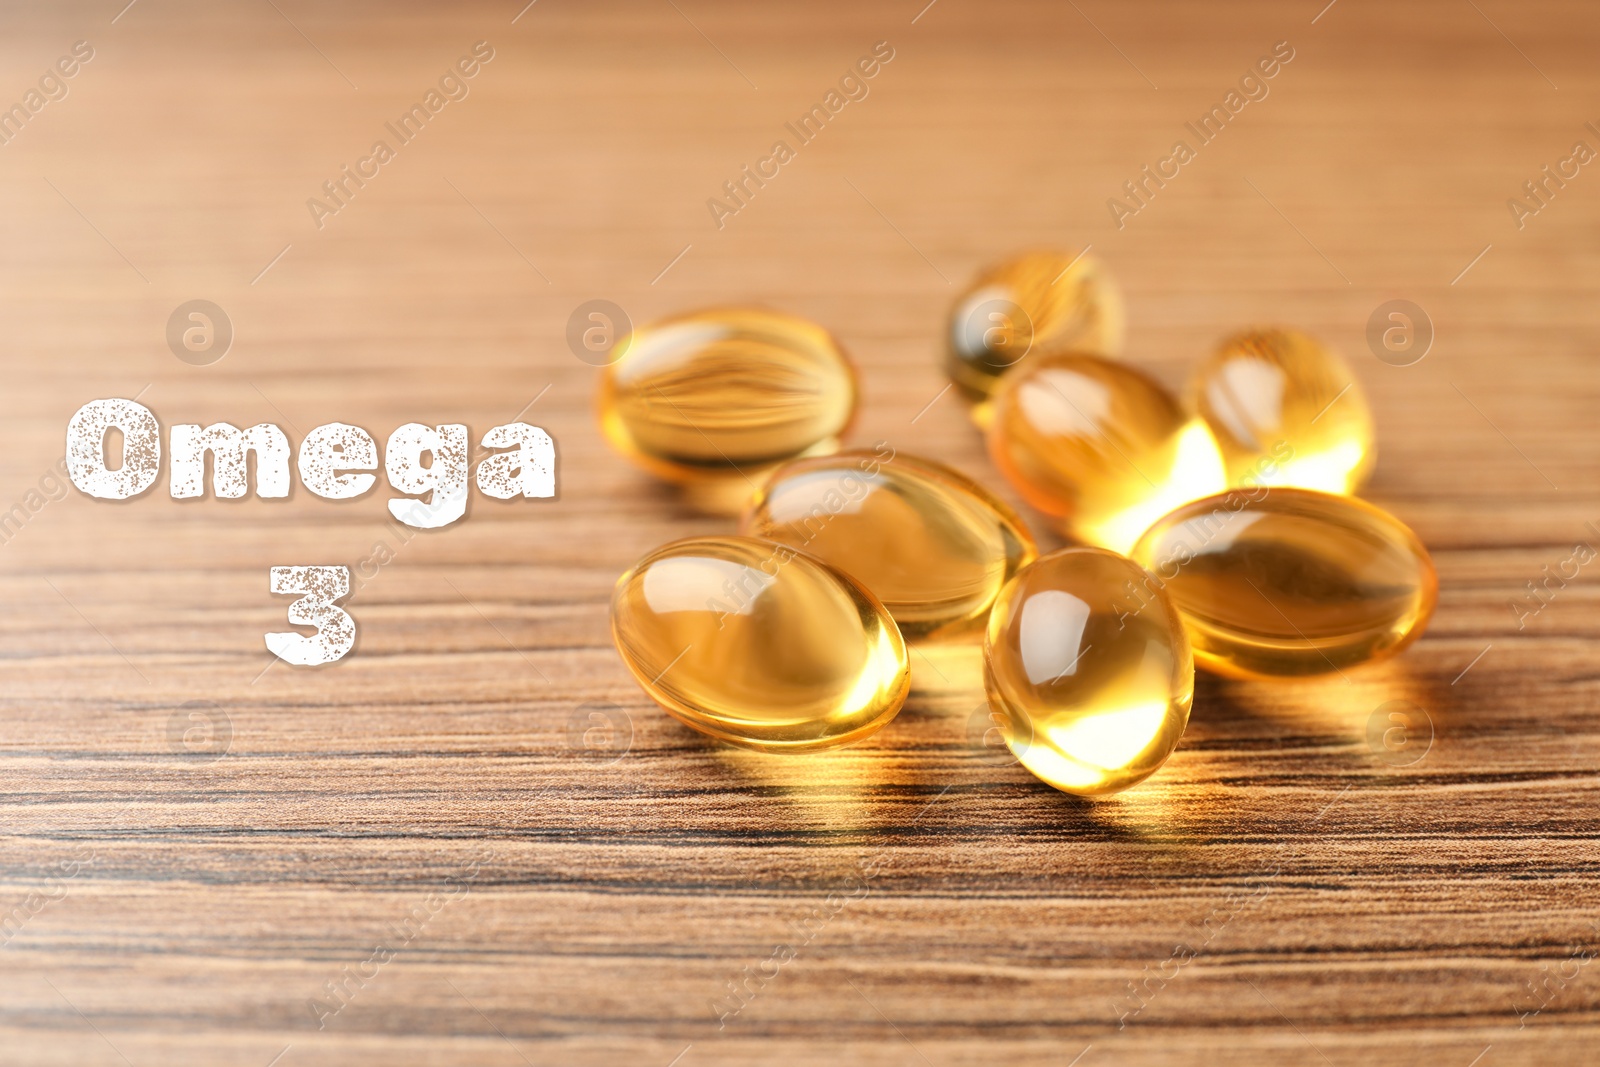 Image of Omega 3. Fish oil capsules on wooden table, closeup